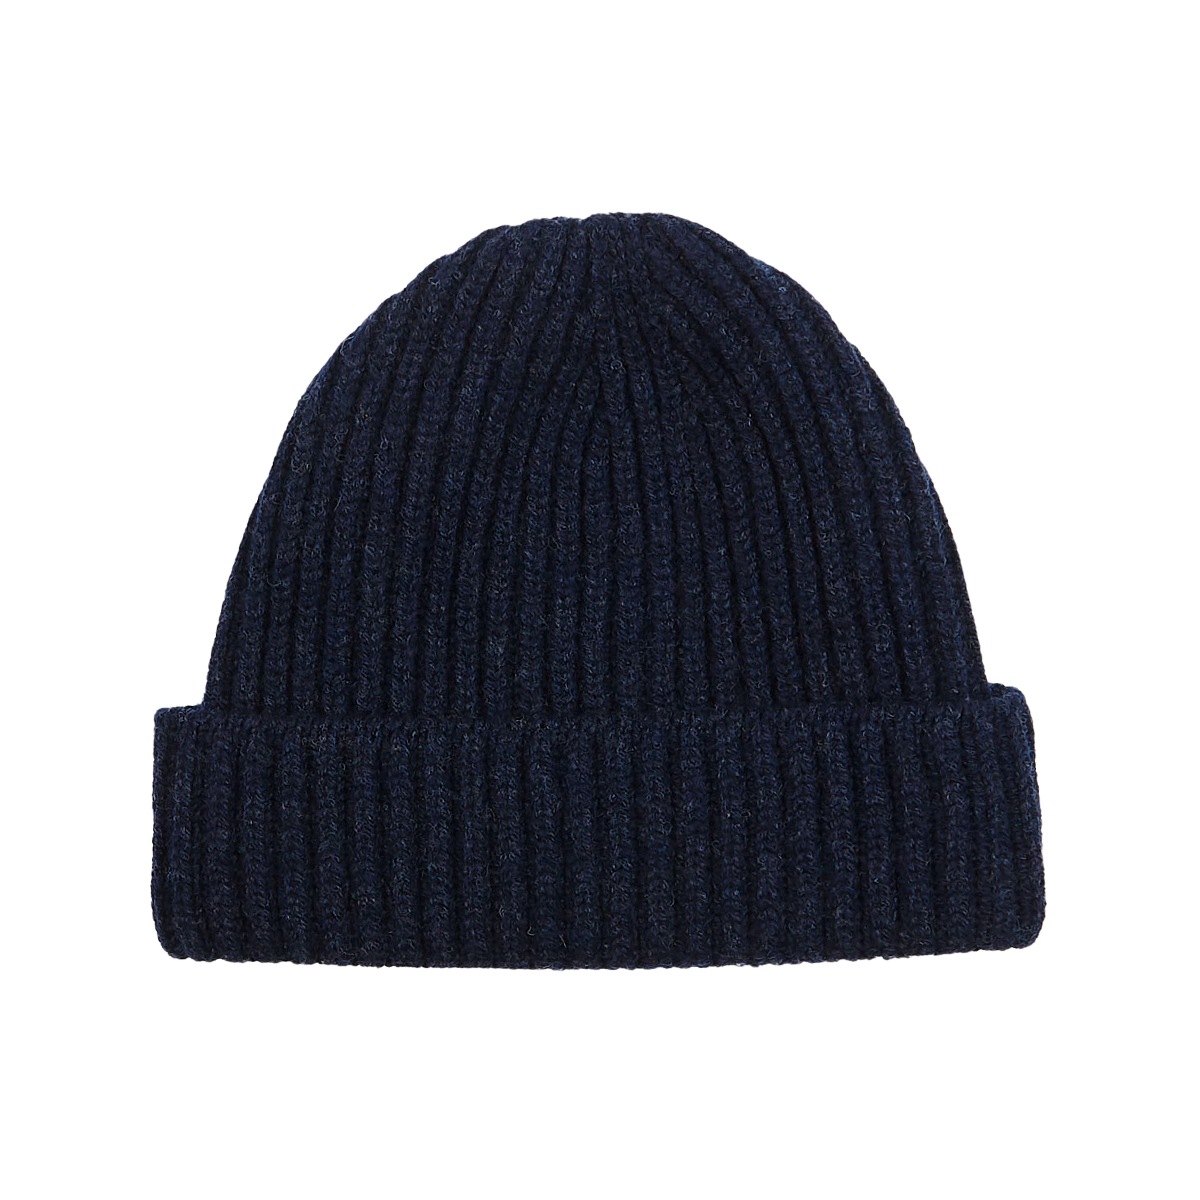 William Lockie Midnightmix Geelong Lambswool Ribbed Beanie Feature